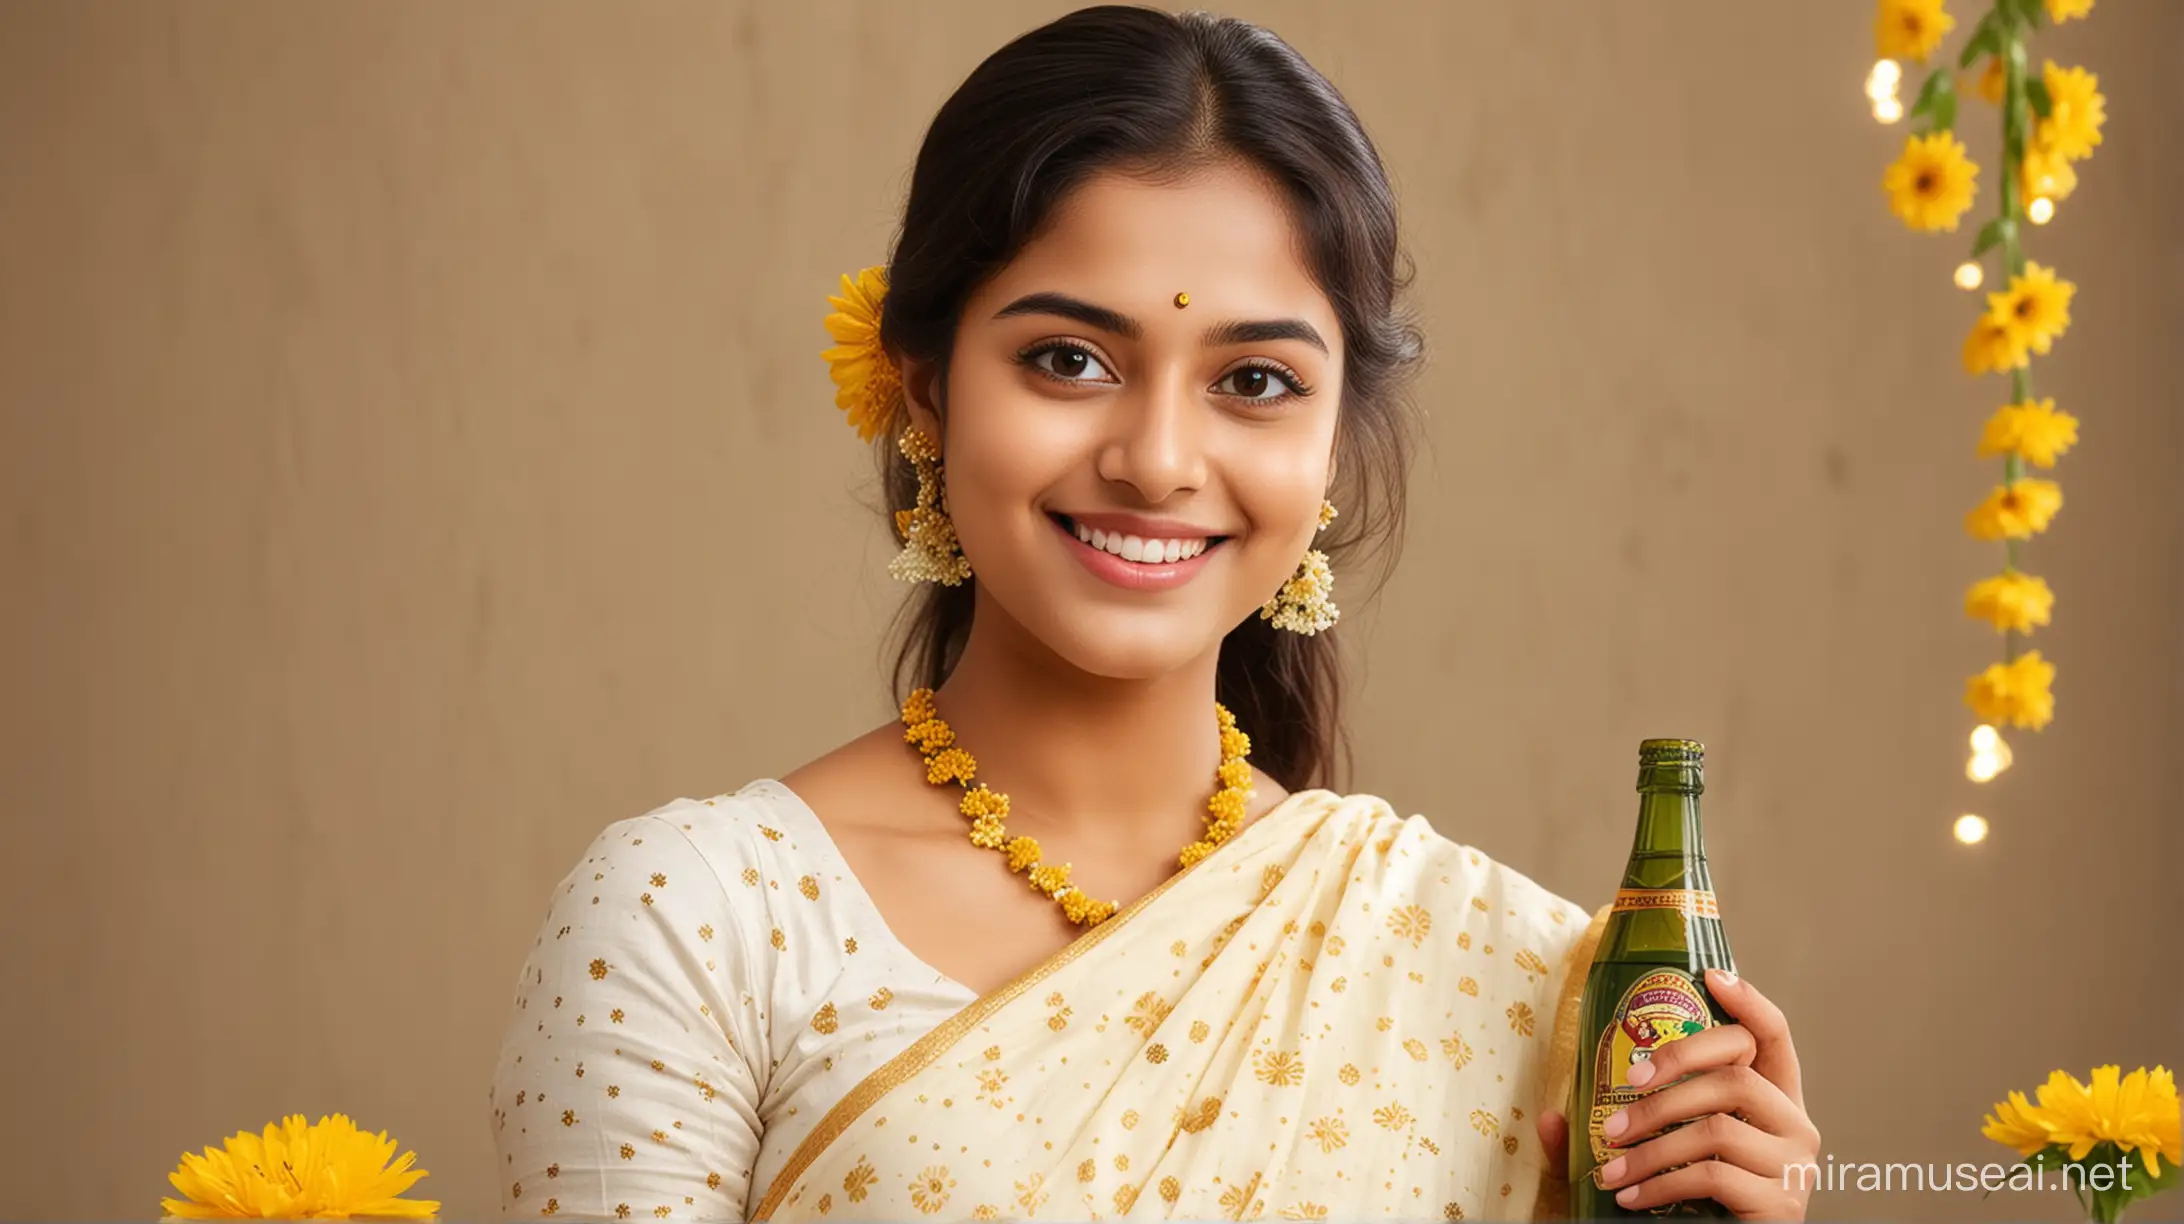 18 year only beautiful kerala girl with cute smile,white skin with with one bottle on hand, mid photo up to belley,graphics bg, glossy yellow flower back ground with sparkles, and stars, wearing kerala traditional saree kerala set saree 